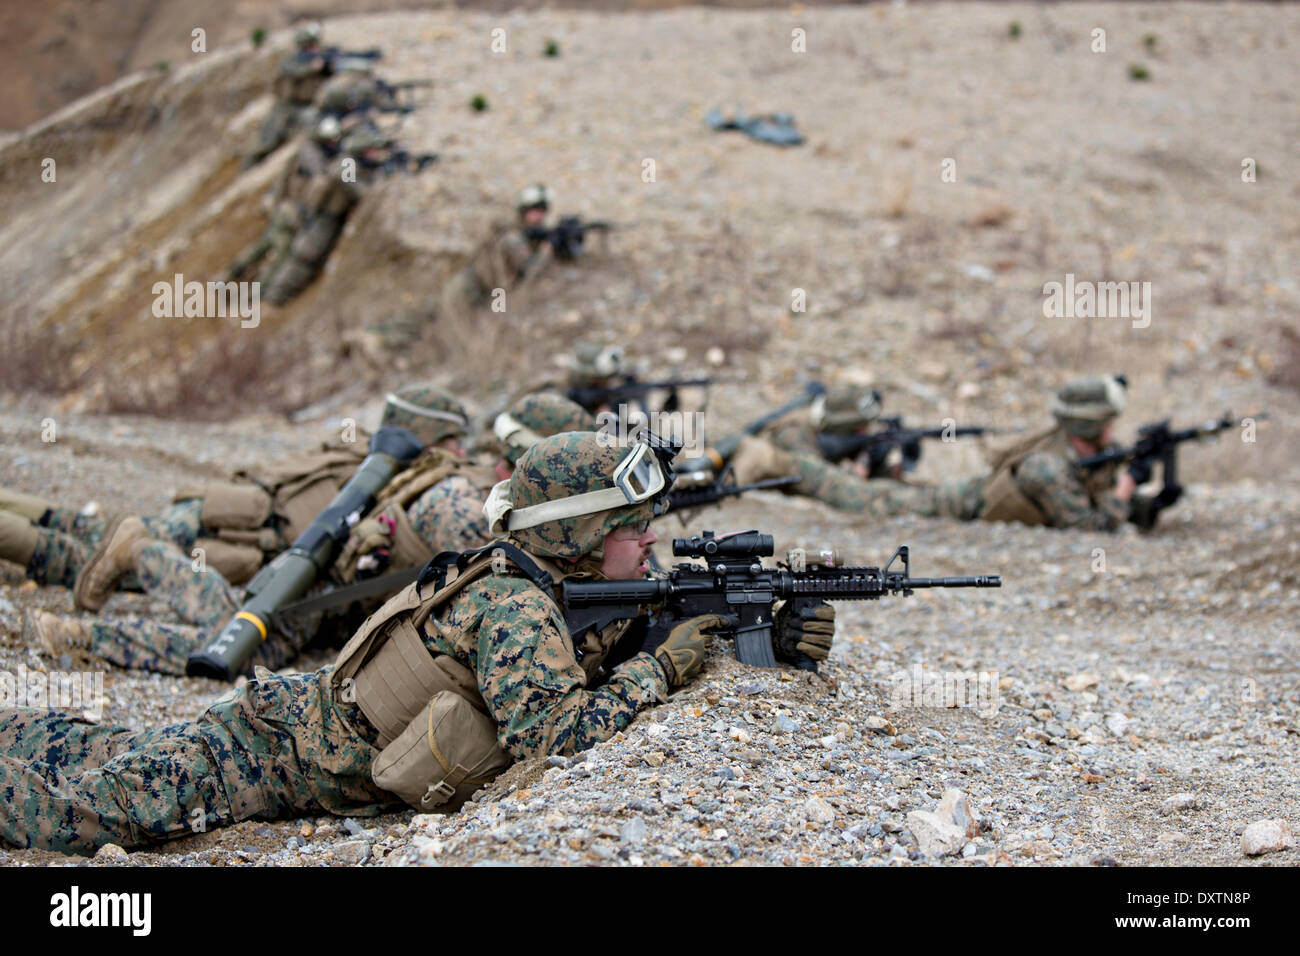 US Marines take cover during live fire exercises as part of joint training exercise Ssang Yong March 26, 2014 in Suesongri, South Korea. Stock Photo